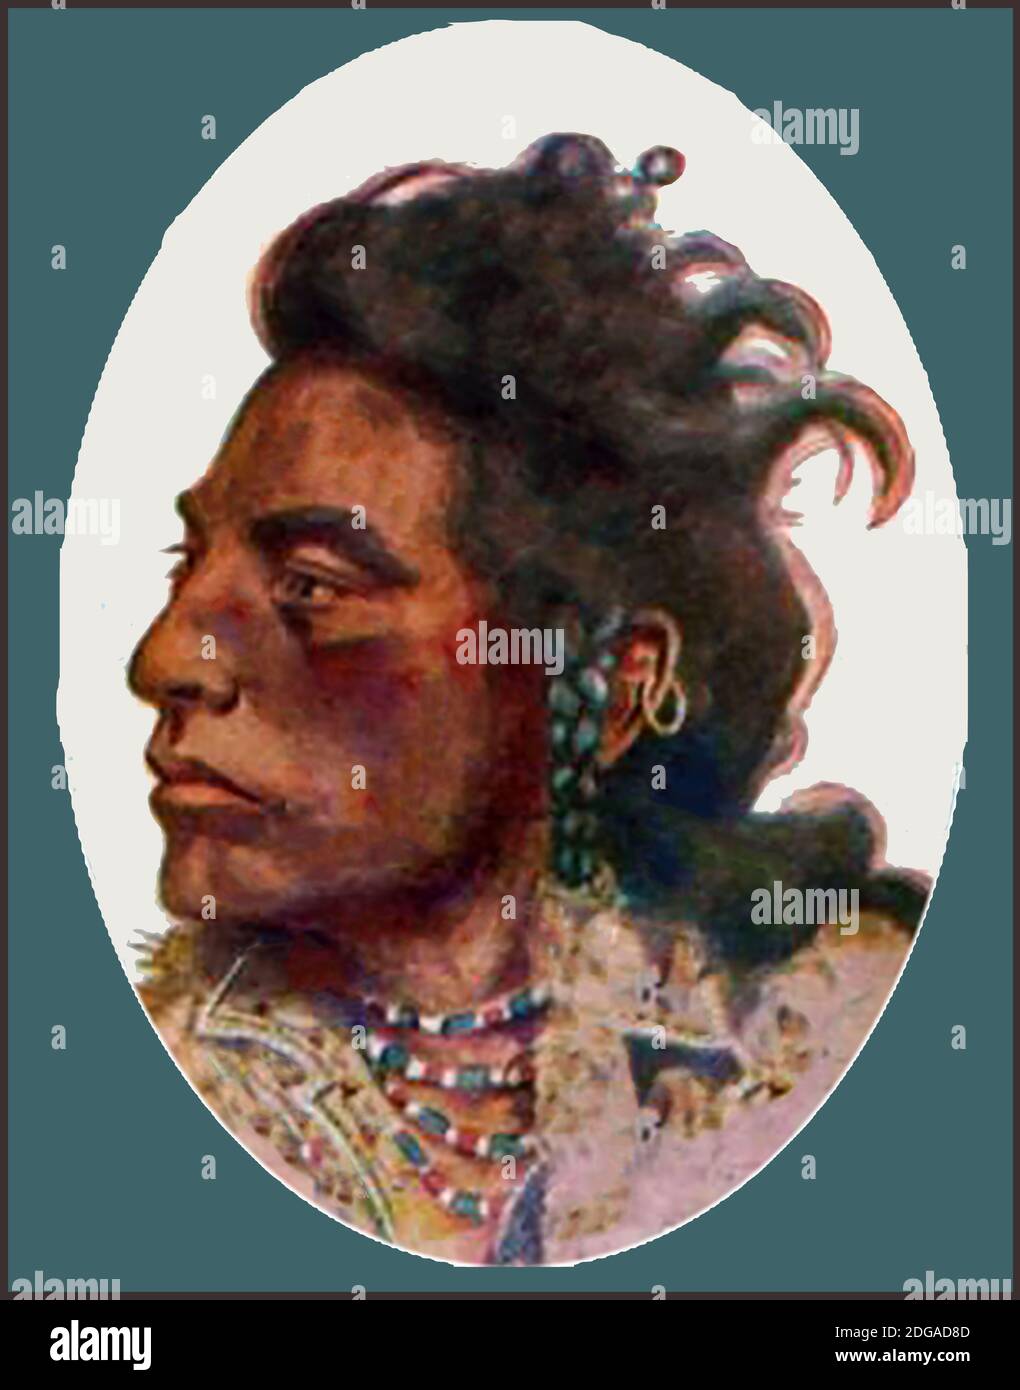 A 1904 colour portrait of Curley (or Curly -   circa 1856–1923) the Crow American Indian scout who witnessed and survived the Battle of theLittle Big Horn in 1876. Real name Ashishishe, he was a scout for the U.S Army  under Custer during the Sioux Wars. Despite many records to the contrary, he did not actually take part in the battle, but observed it and reported the defeat  of the 7th Cavalry Regiment.  His name also recorded as Shishi'esh meant  'the crow'. Later he lived on the Crow Reservation on the bank of the Little Bighorn River near the battle site and served inthe Crow police. Stock Photo